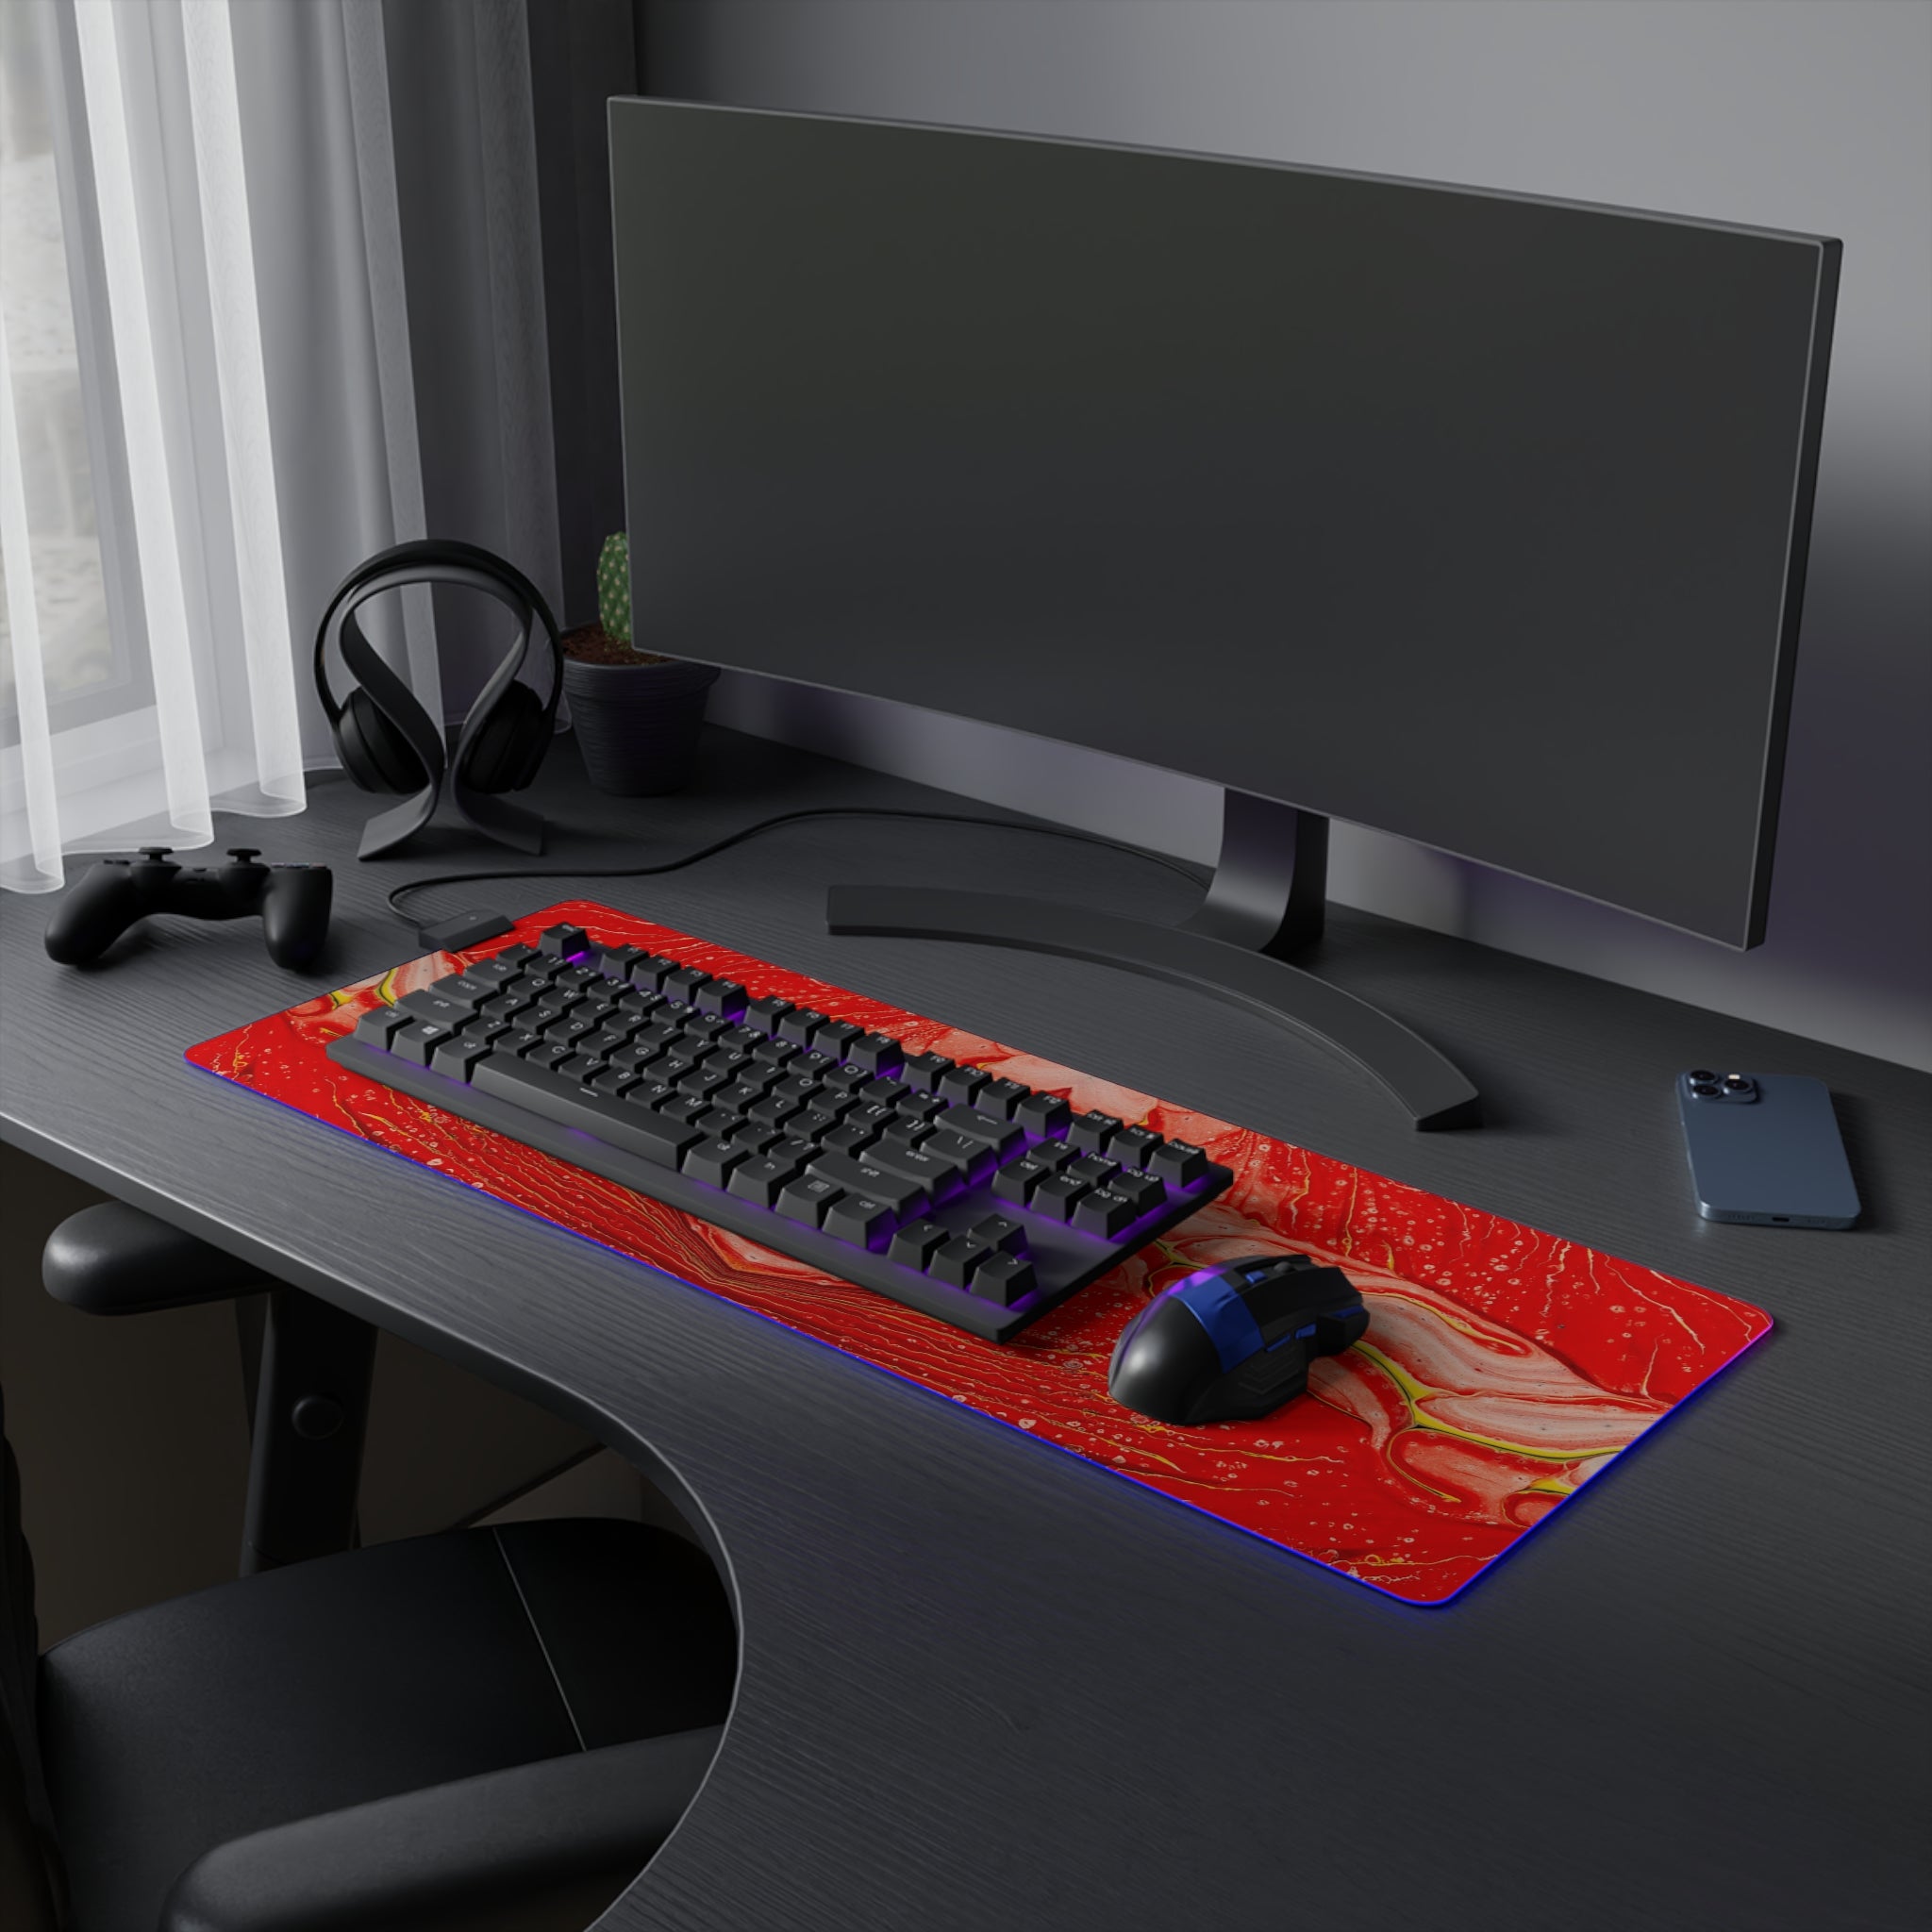 Cameron Creations - LED Gaming Mouse Pad - Galactica Organis - Concept 3